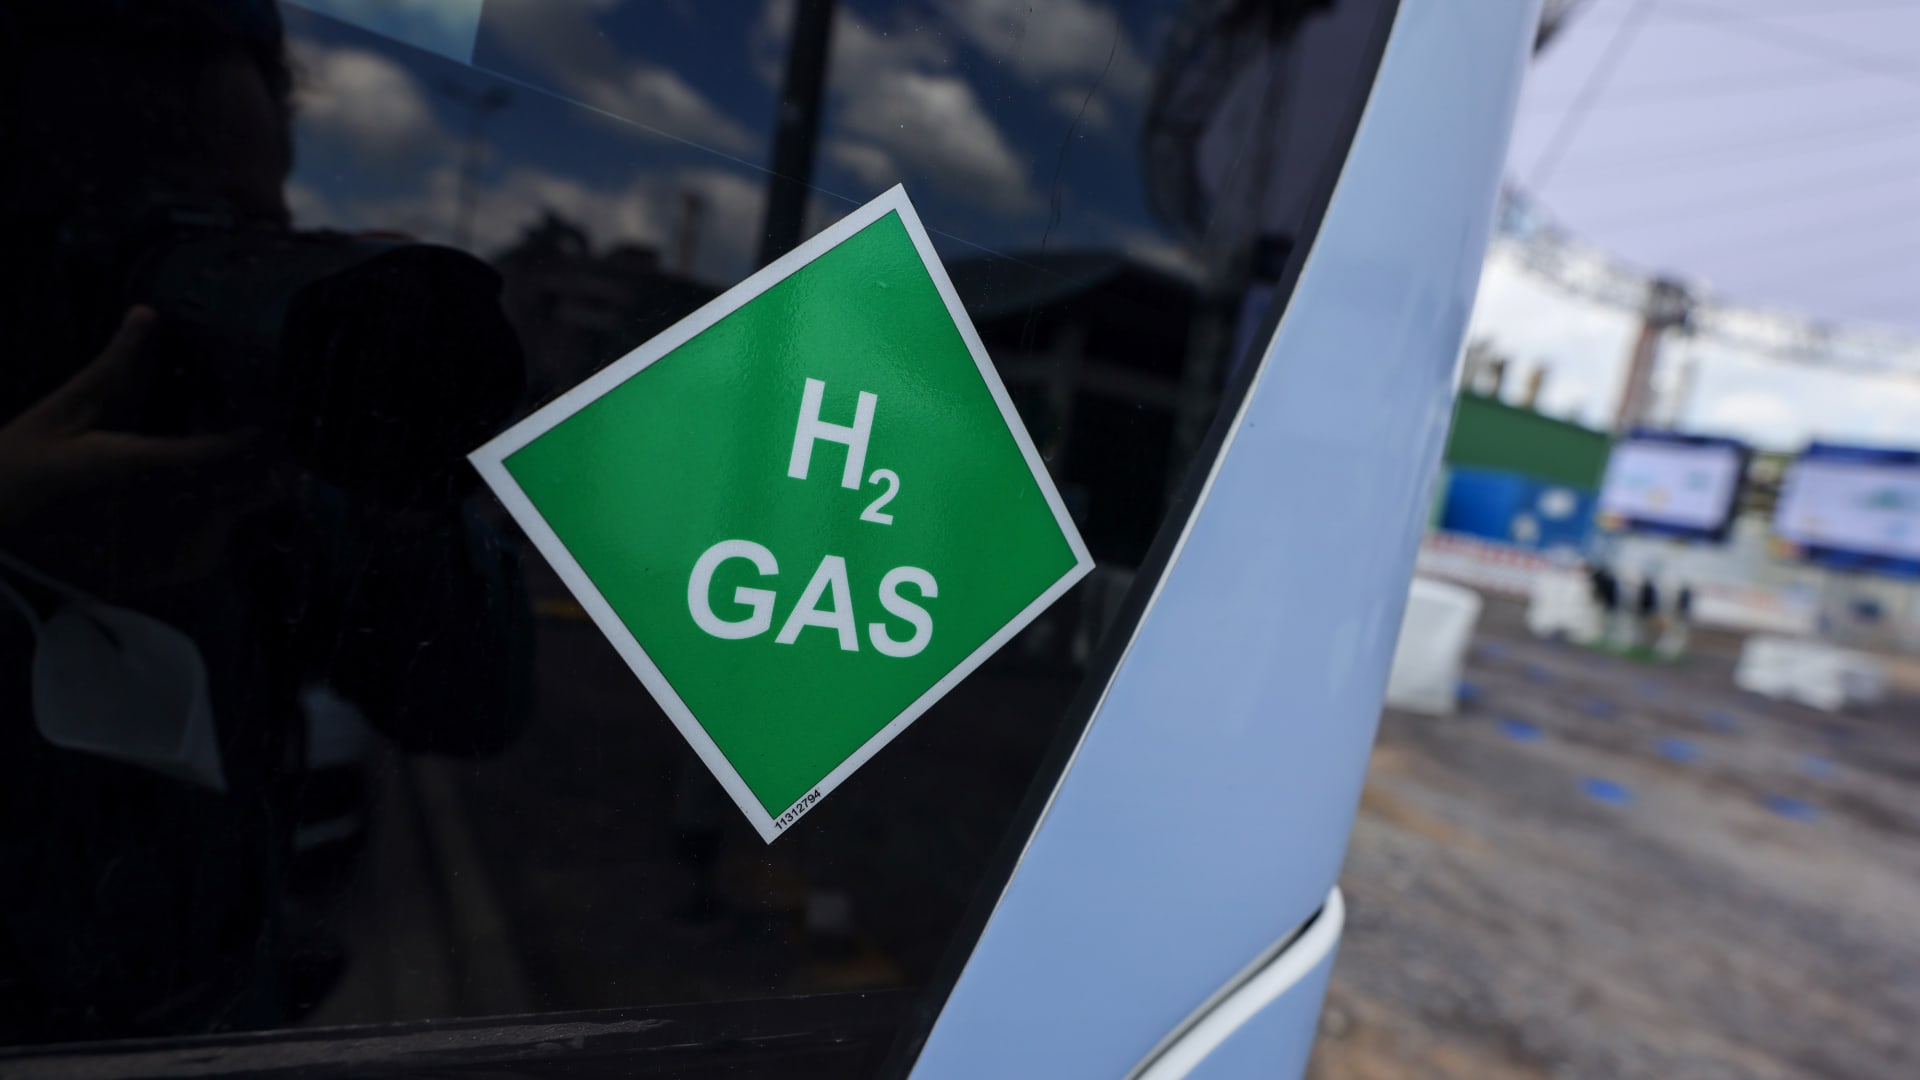 The race to make green hydrogen competitive is on